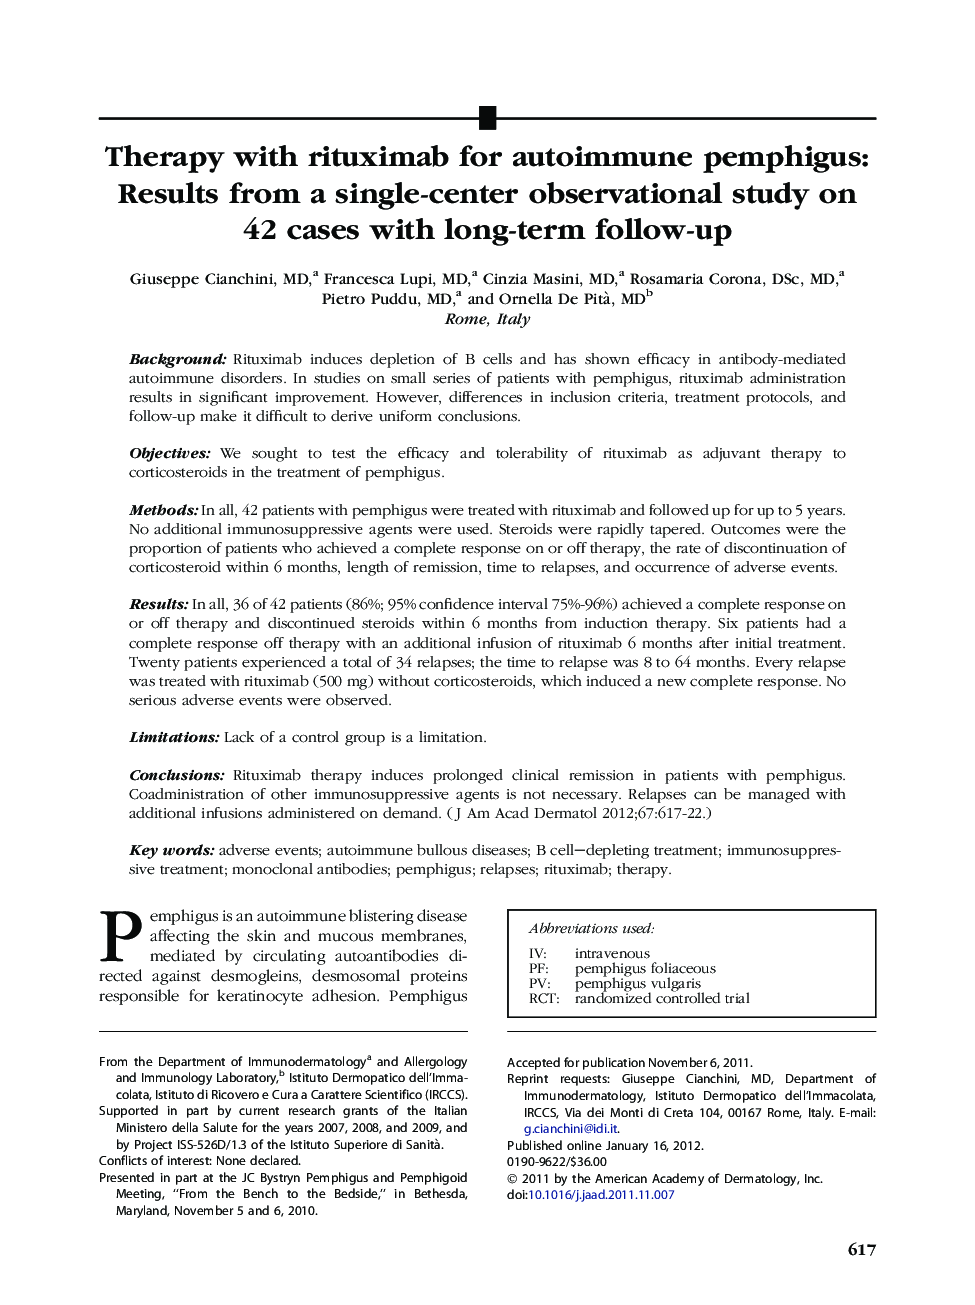 Therapy with rituximab for autoimmune pemphigus: Results from a single-center observational study on 42 cases with long-term follow-up 